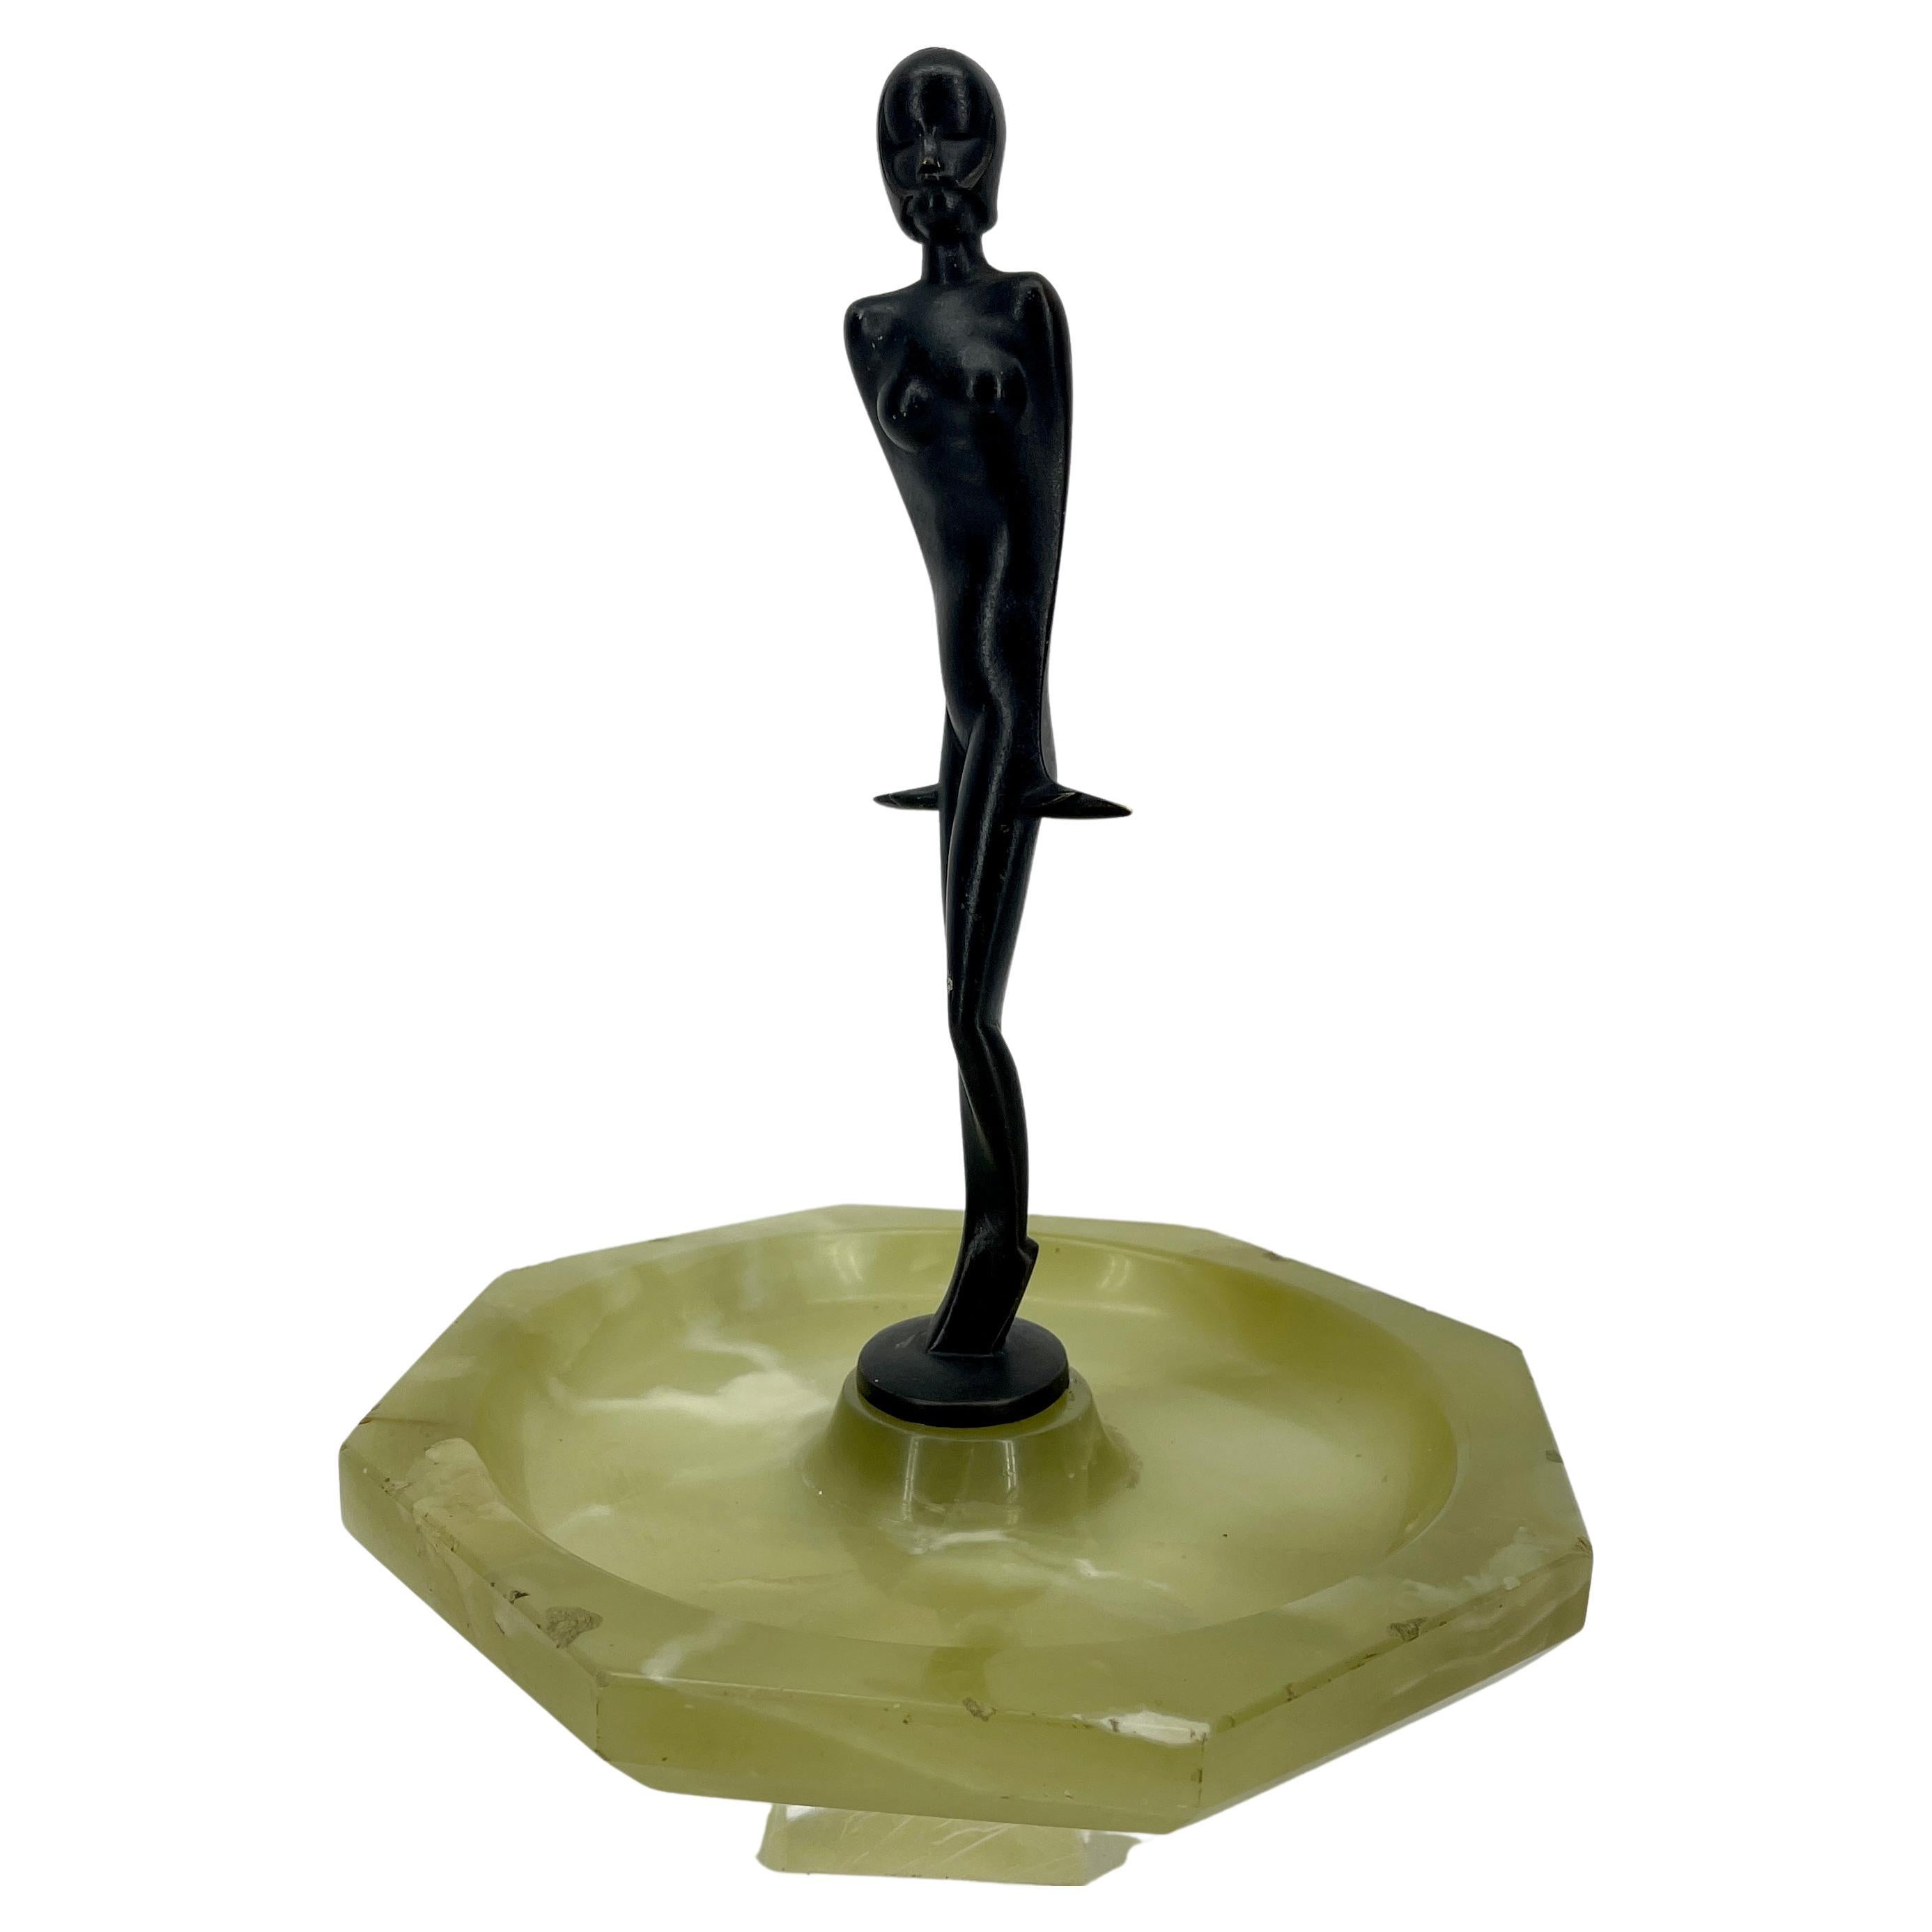 Large Art Deco Green Onyx Cigar Ashtray with Nude Bronze Lady Sculpture.
Signed 